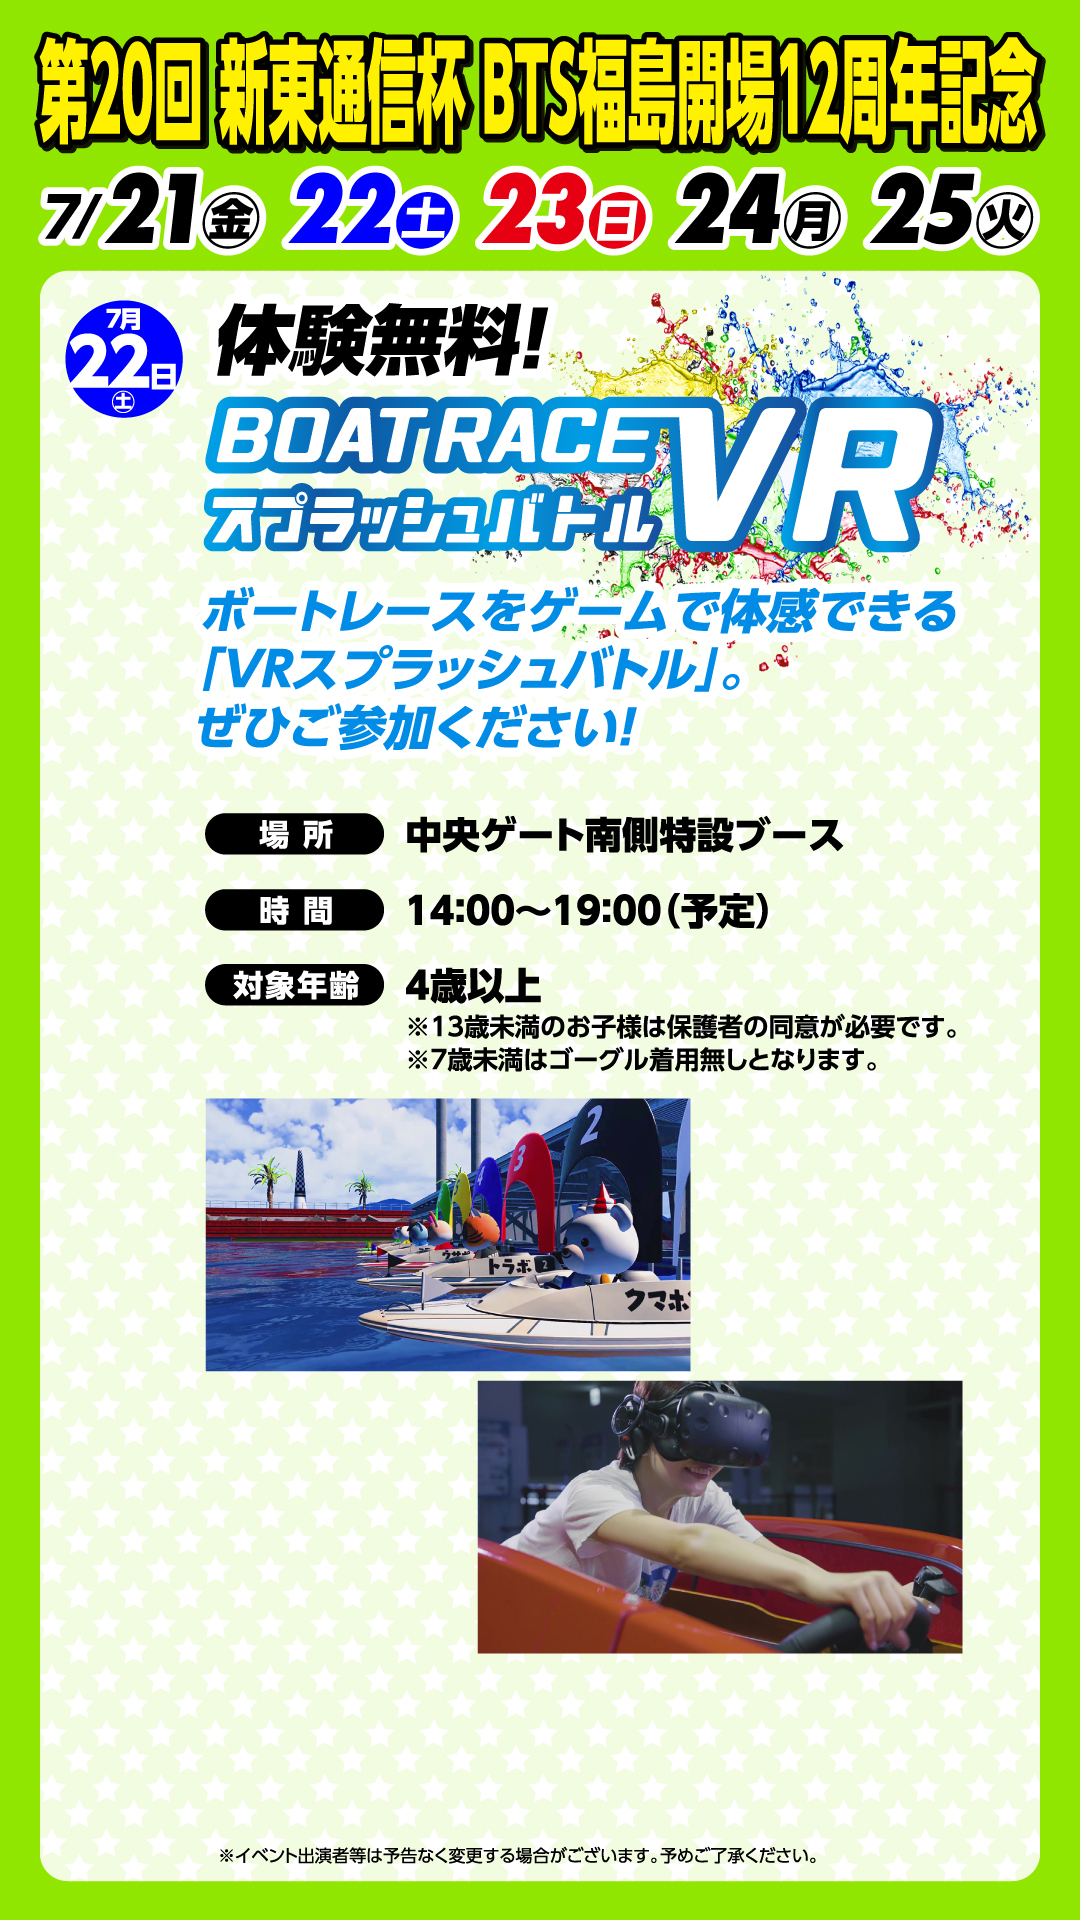 BOAT RACE 桐生 Official Site 新着情報